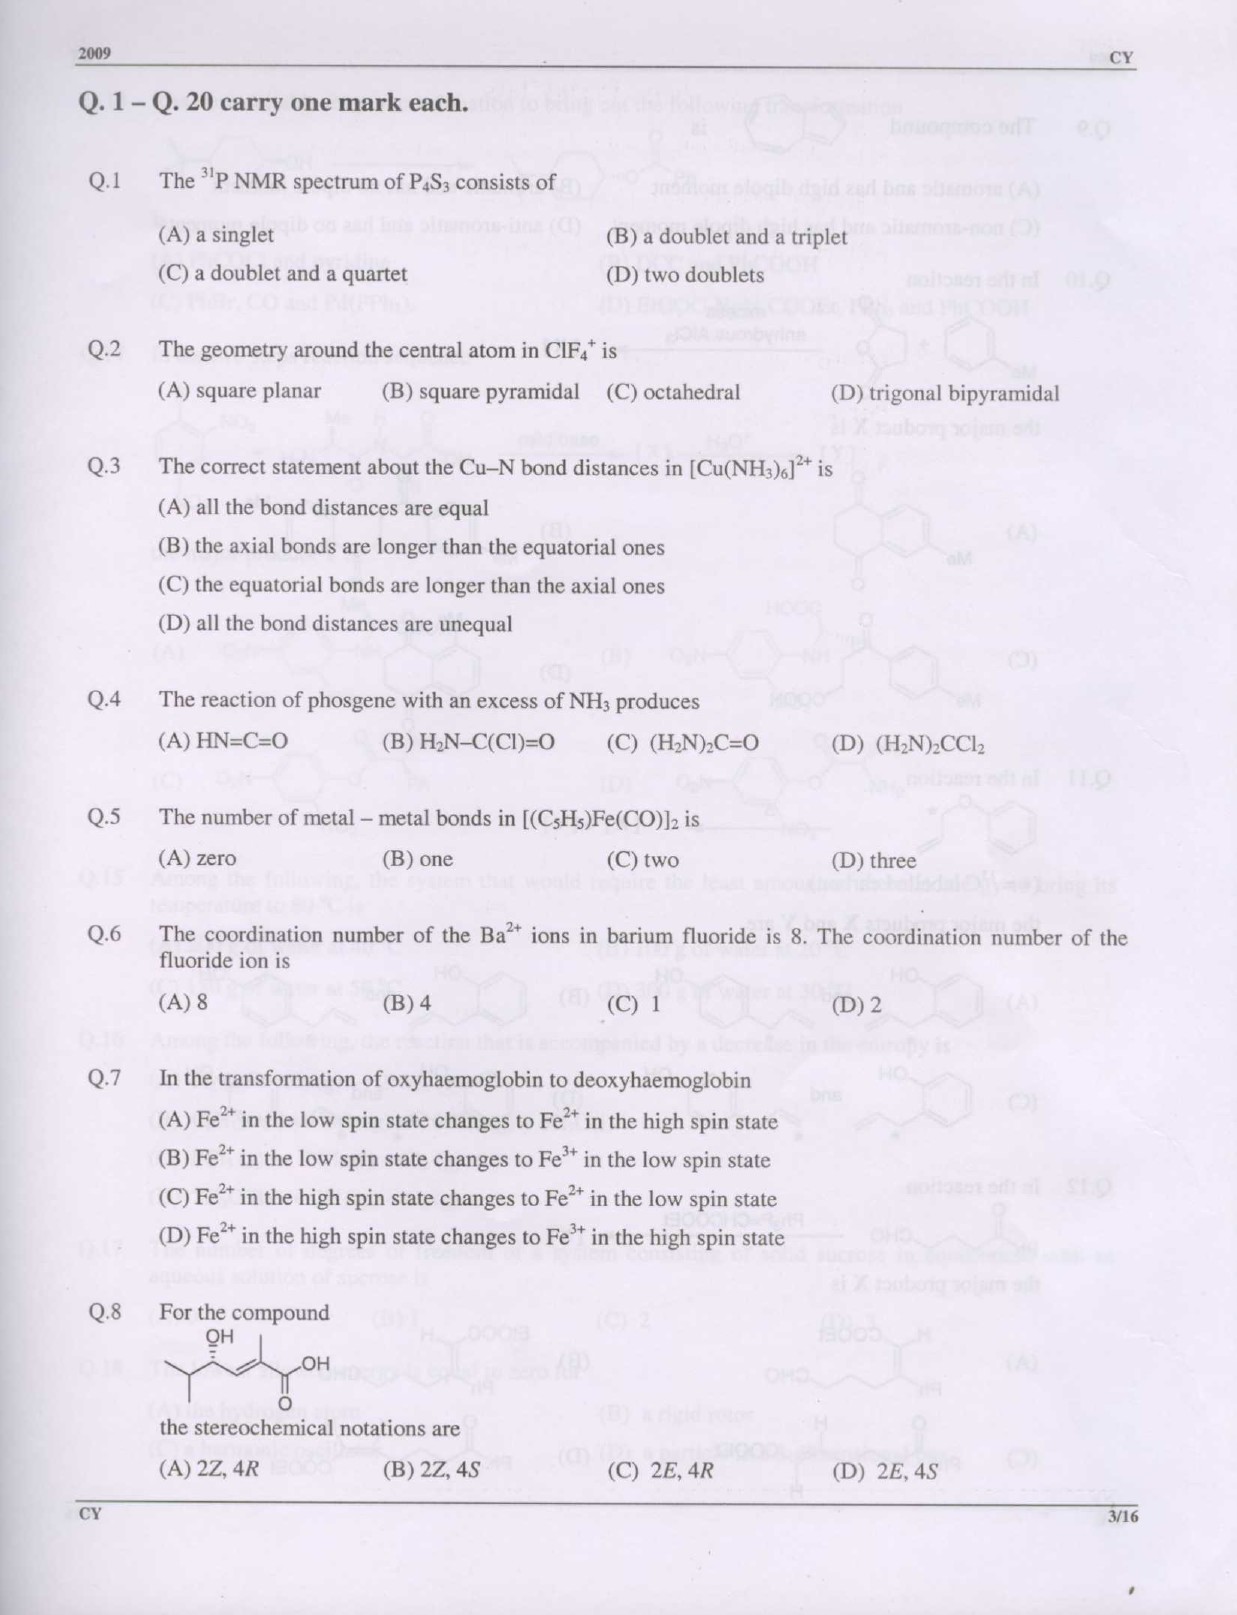 GATE Exam Question Paper 2009 Chemistry 3